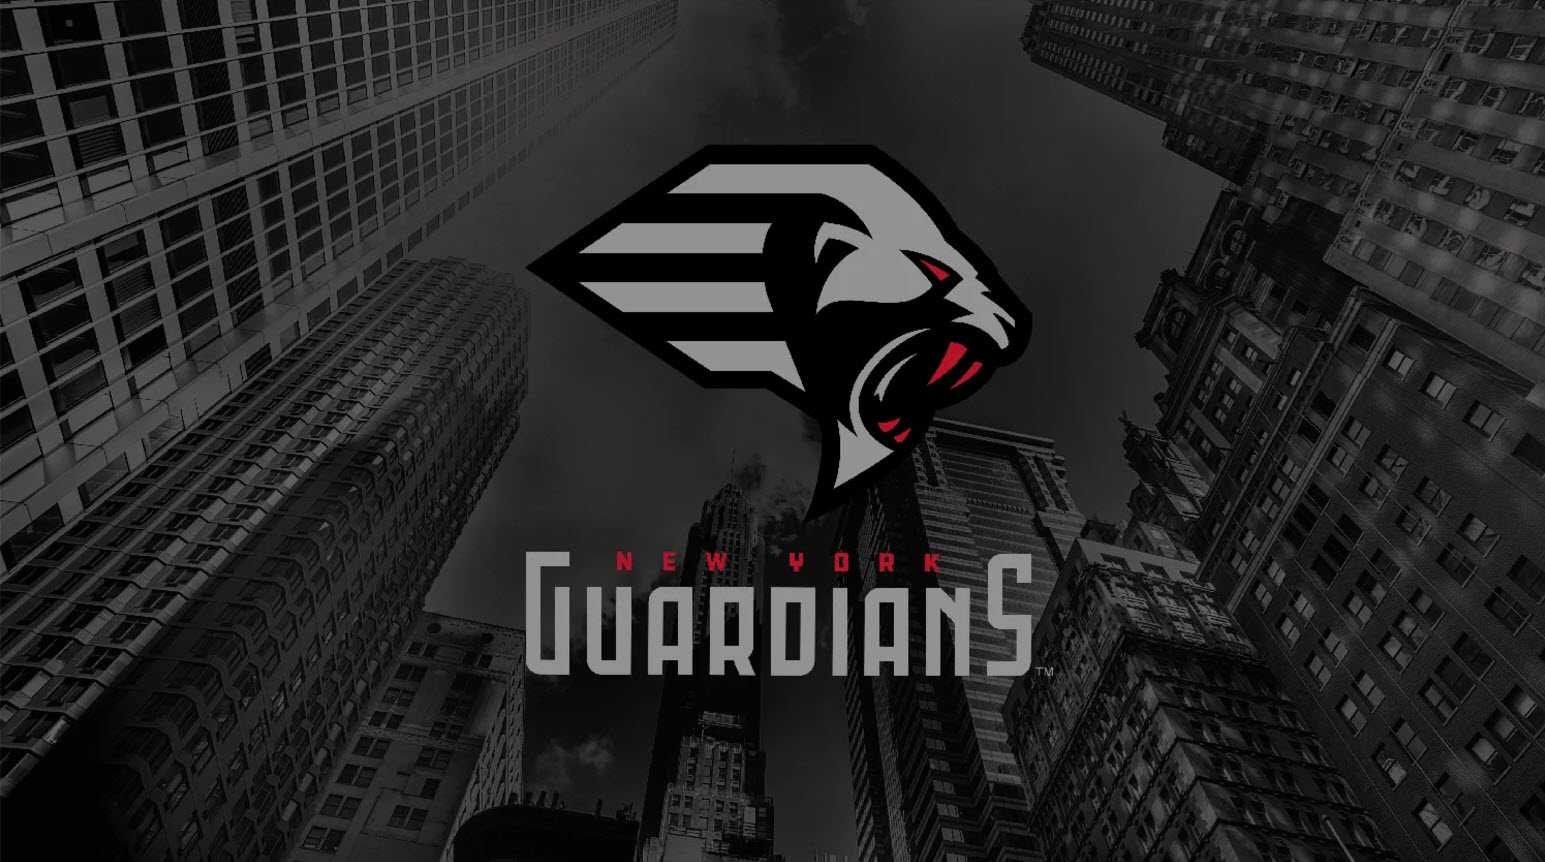  Reporting for Duty: XFL Week Four – Guardians Tame Wildcats, 17-14